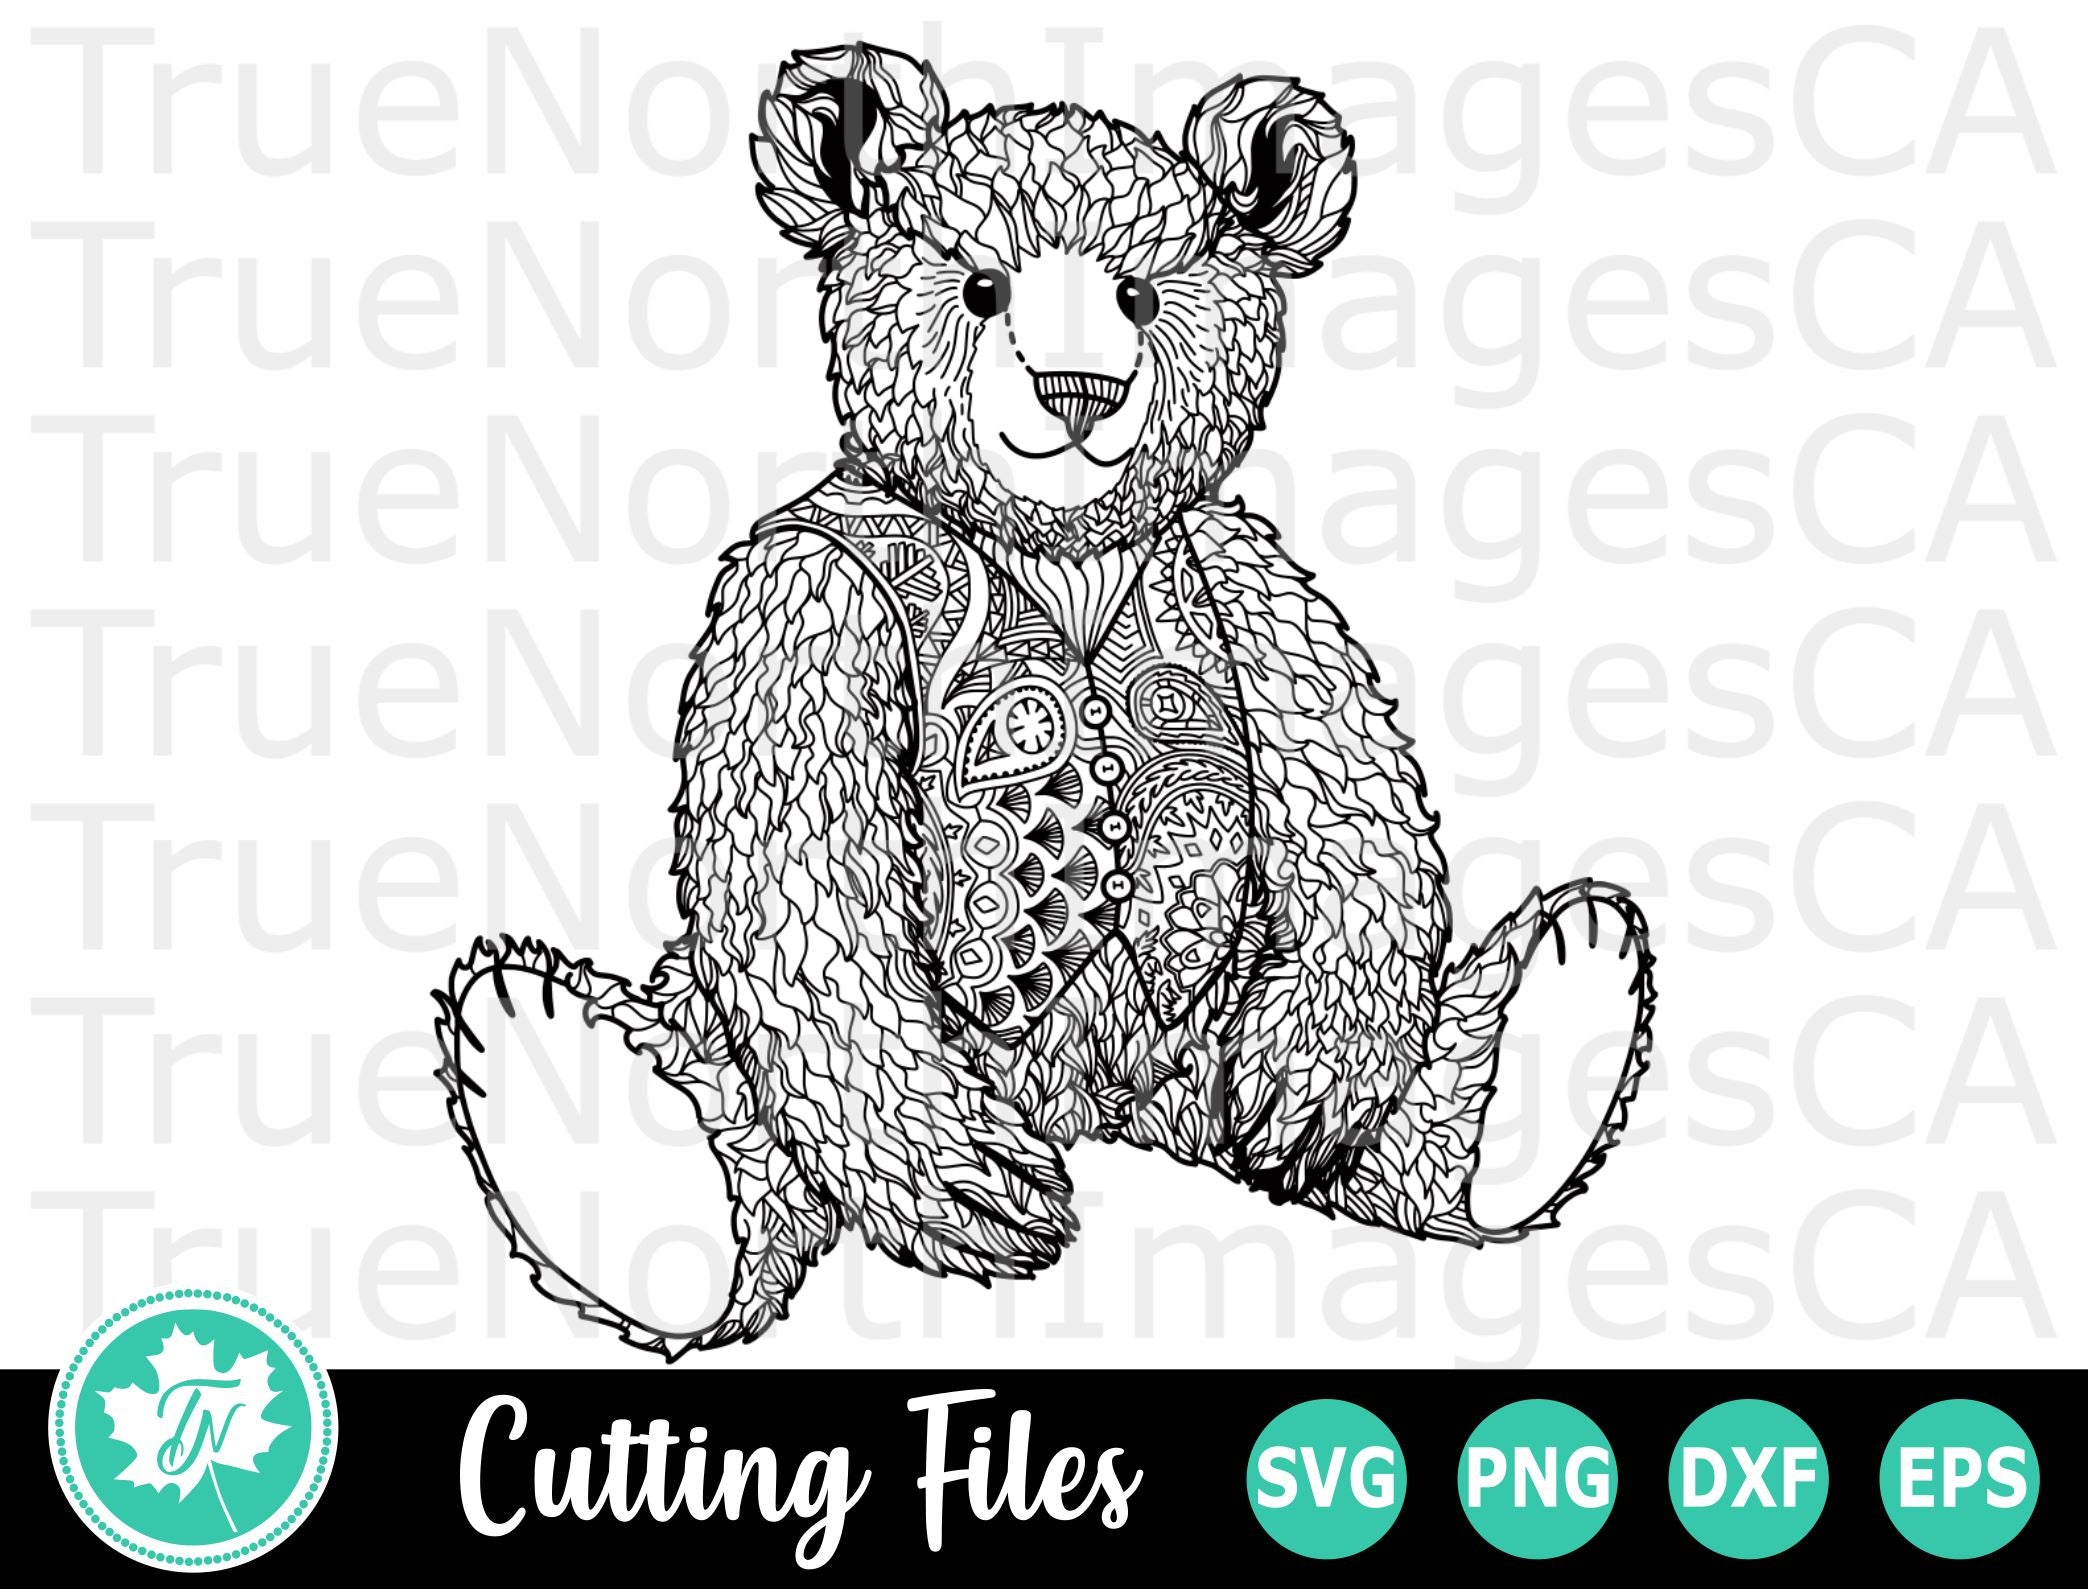 Teddy Bear SVG, PNG, DXF Digital Files Include - So Fontsy